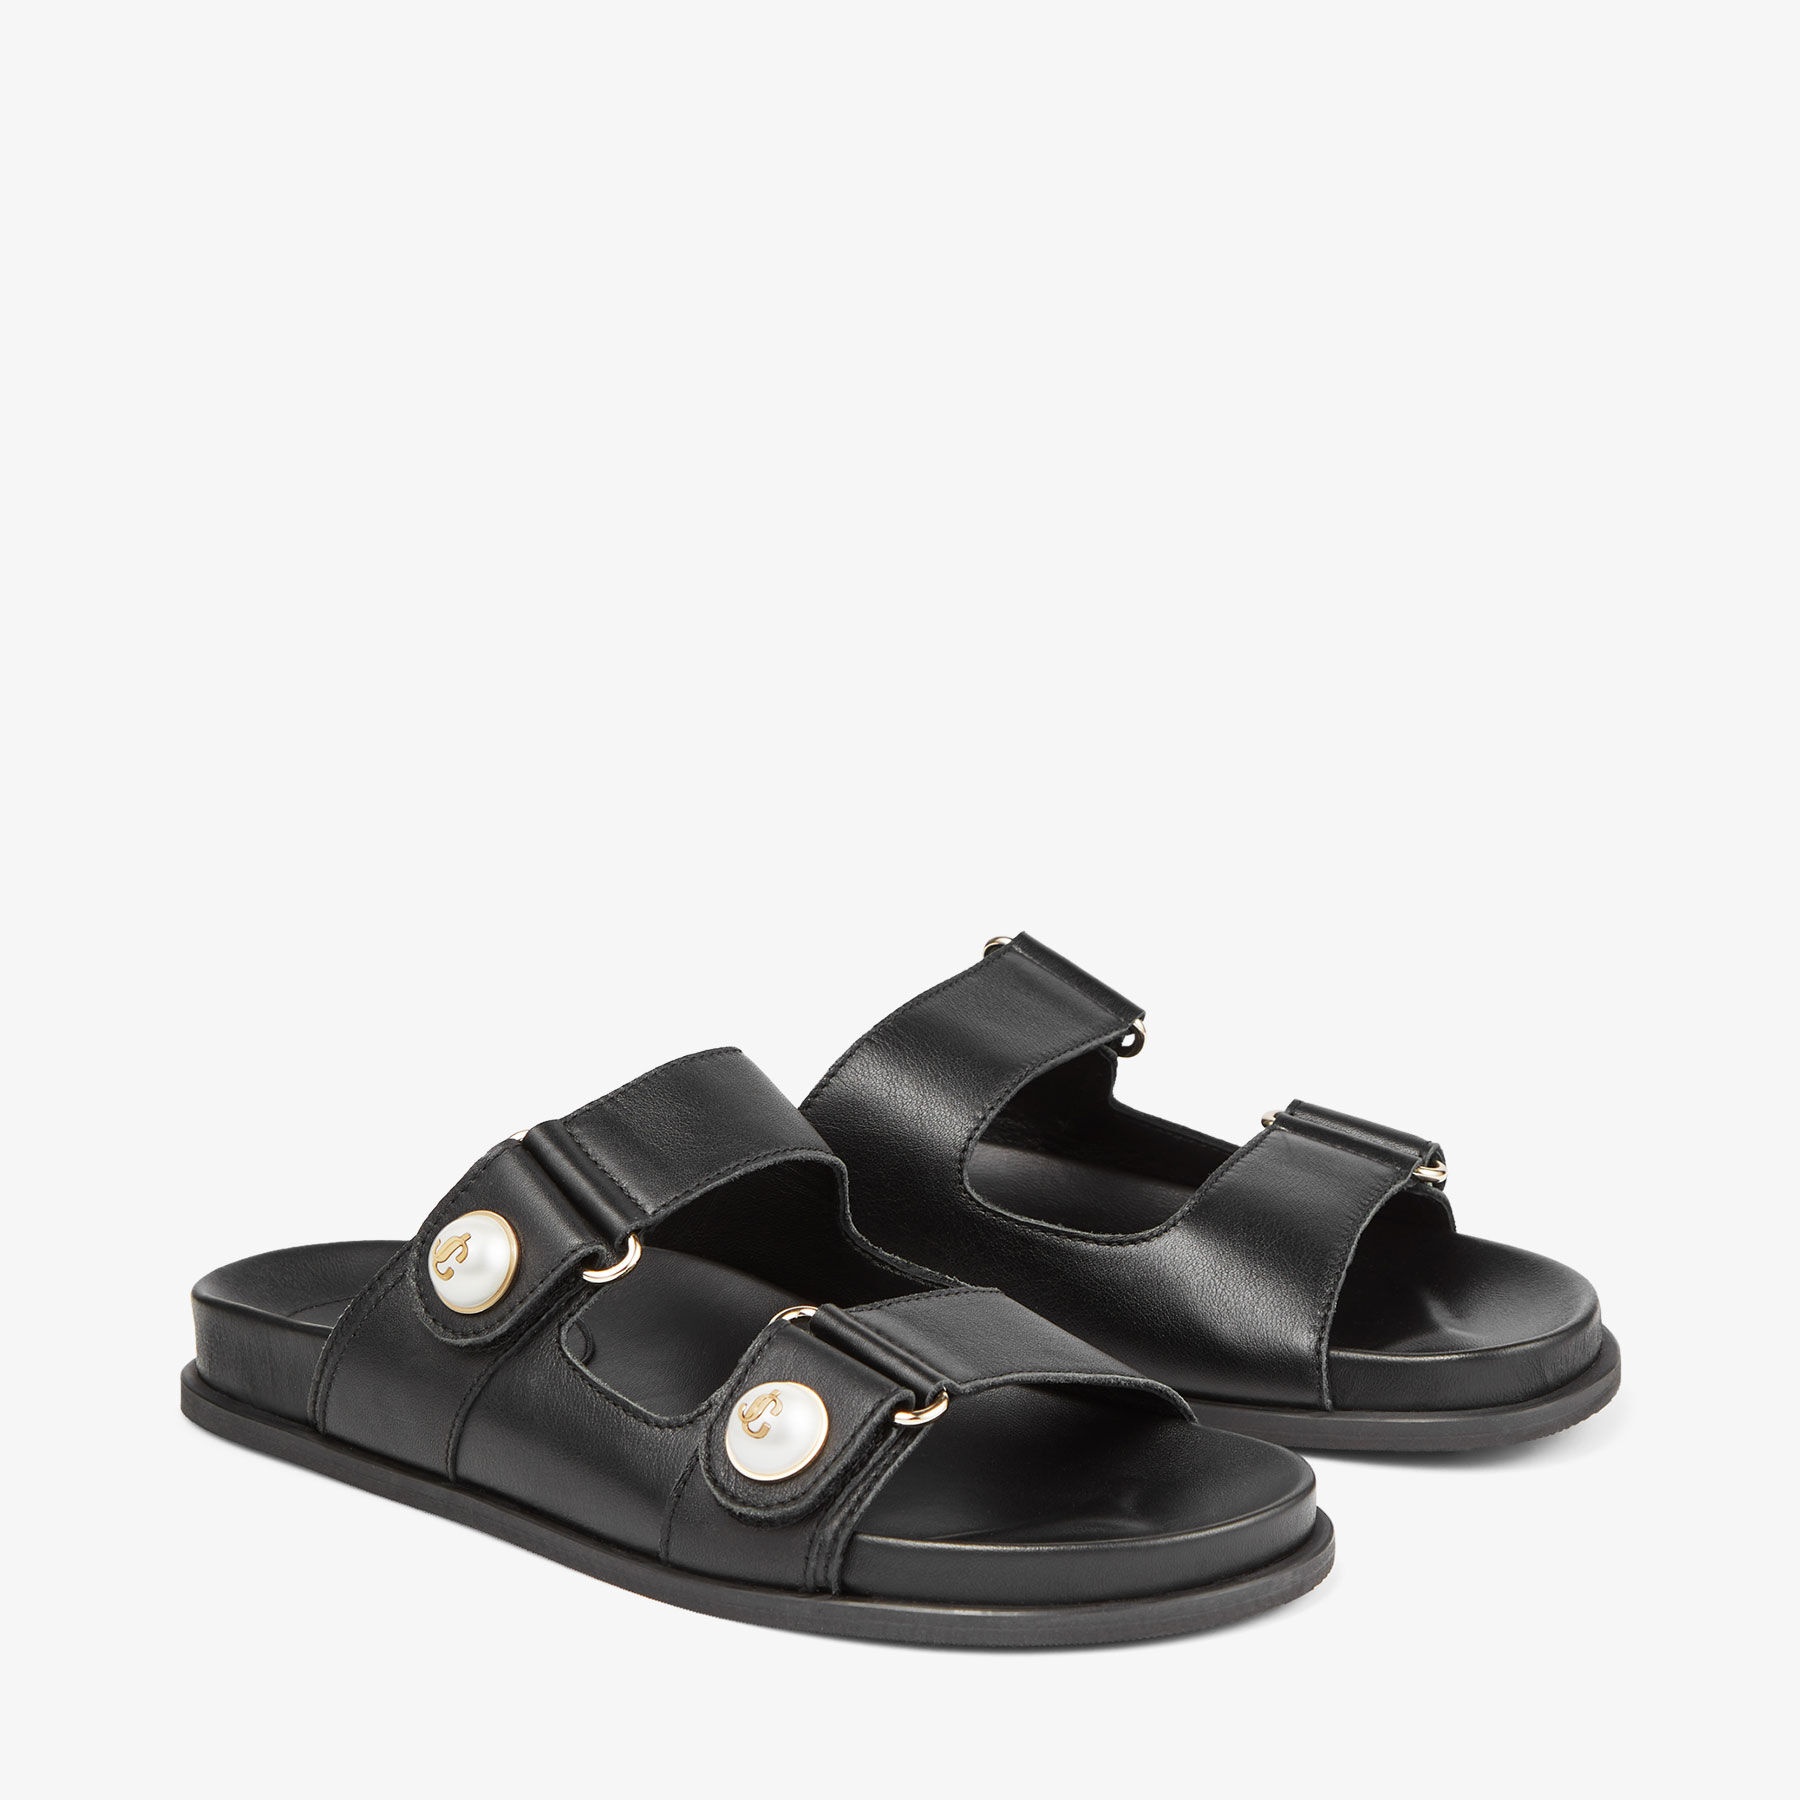 Fayence Sandal
Black Leather Flat Sandals with Pearl Embellishment - 3